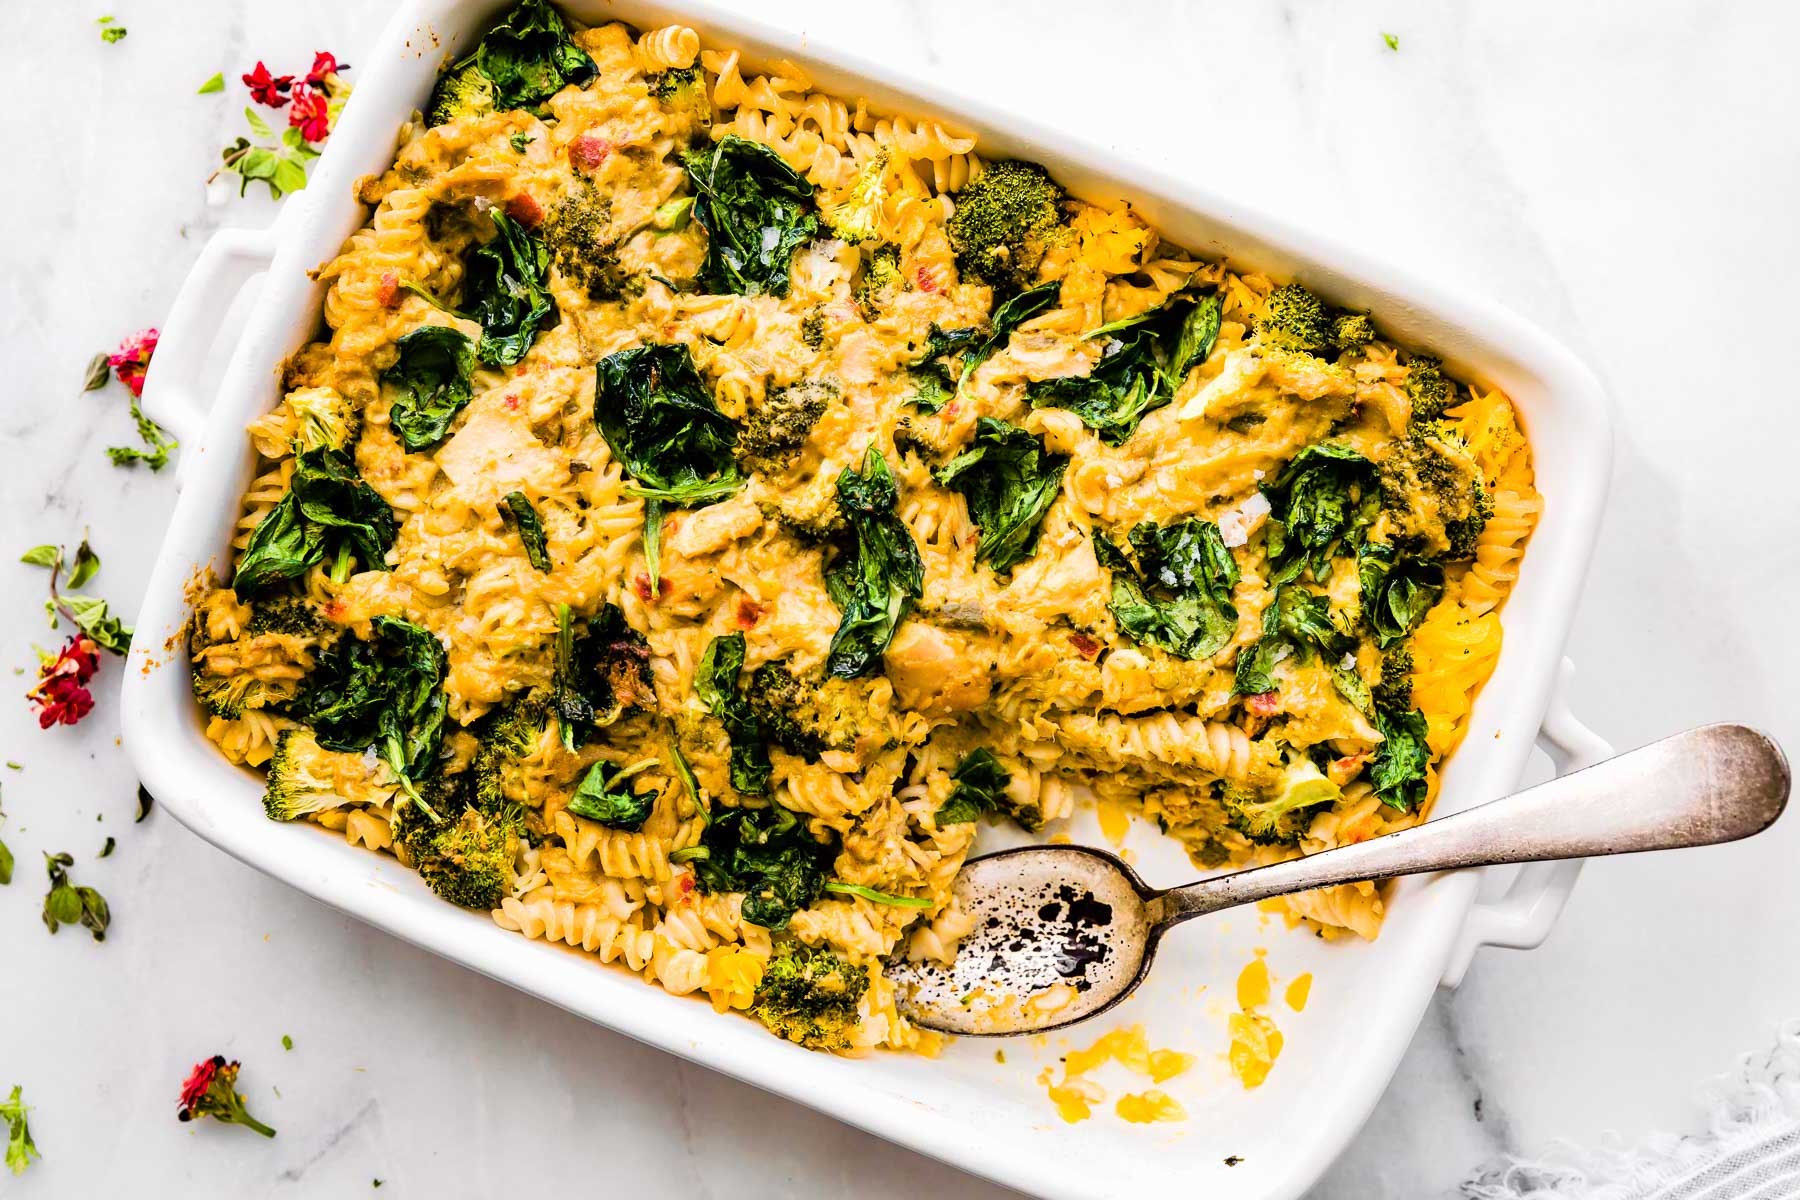 White baking dish with tuna noodle casserole with spinach and broccoli, a serving removed from corner with spoon resting on dish.